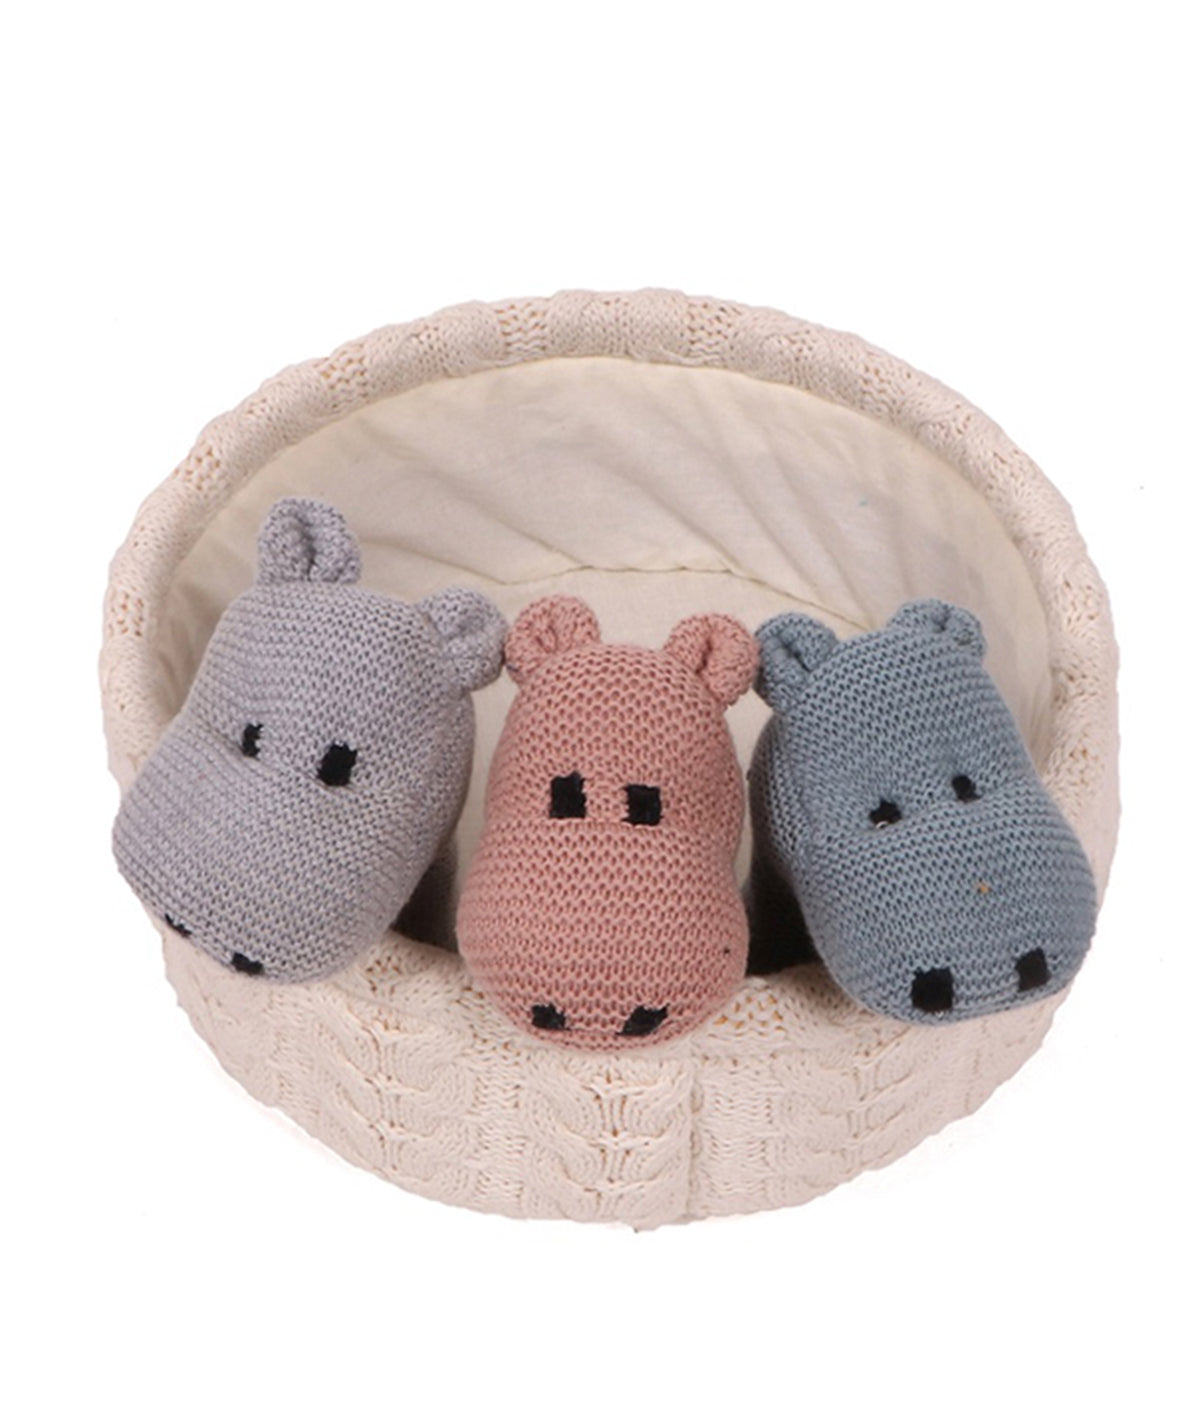 Rattle Hippo - Pale Pink 100% Cotton Knitted Stuffed Soft Toy for Babies / Kids